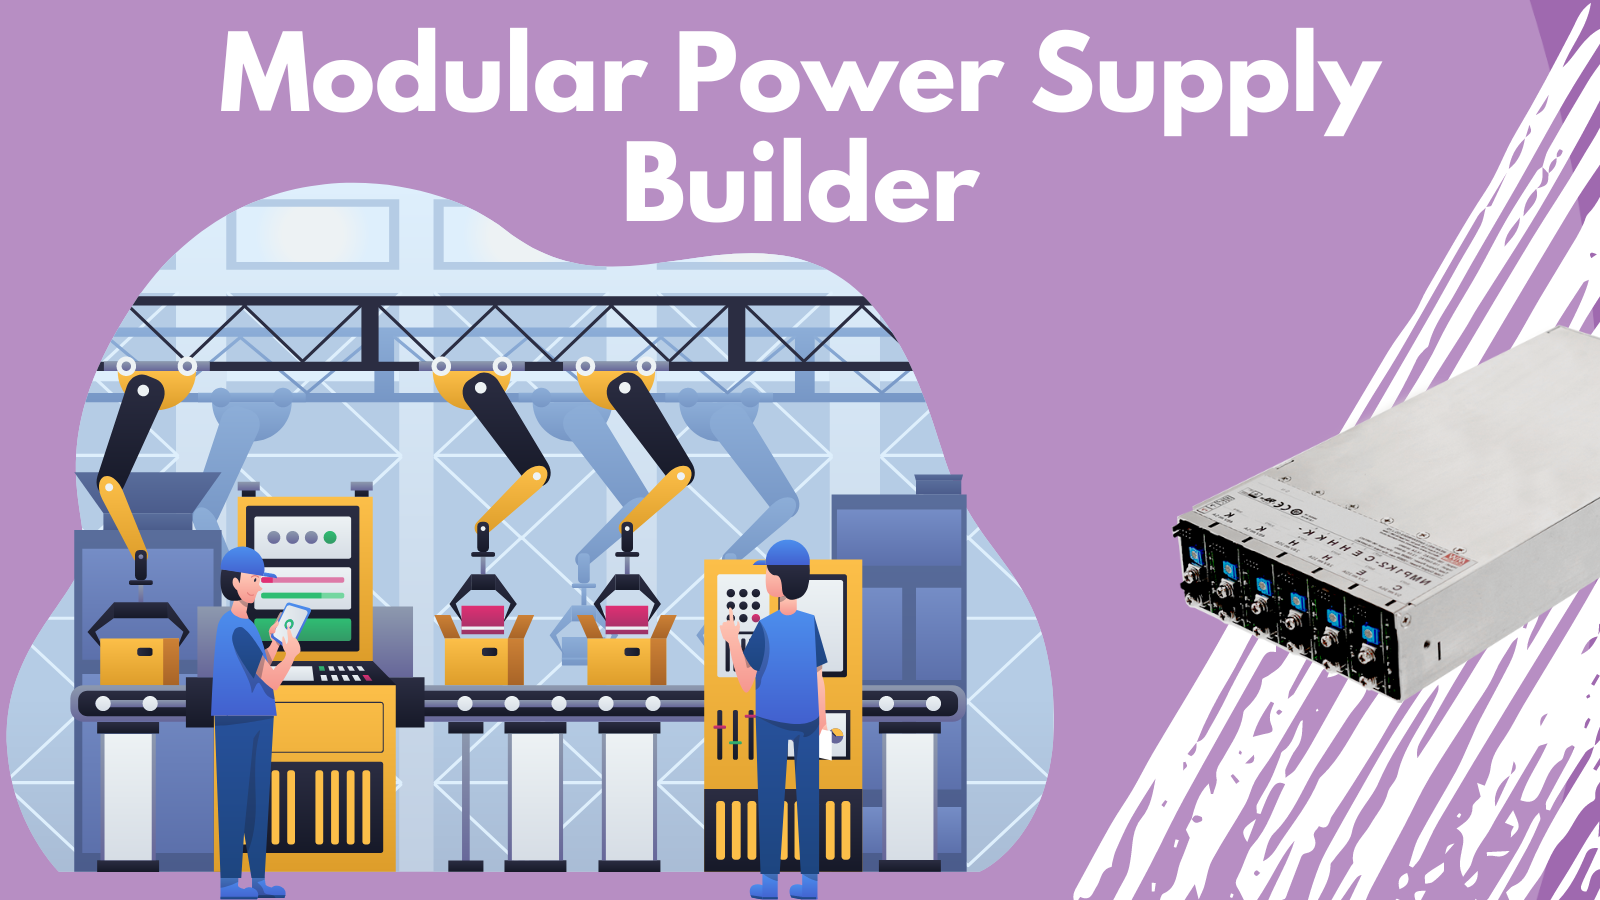 Title "Modular Power Supply Builder" at the top in bold white lettering, underneath is a picture of an assembly line with parts on a conveyer belt. To the right is a picture of a modular power supply.